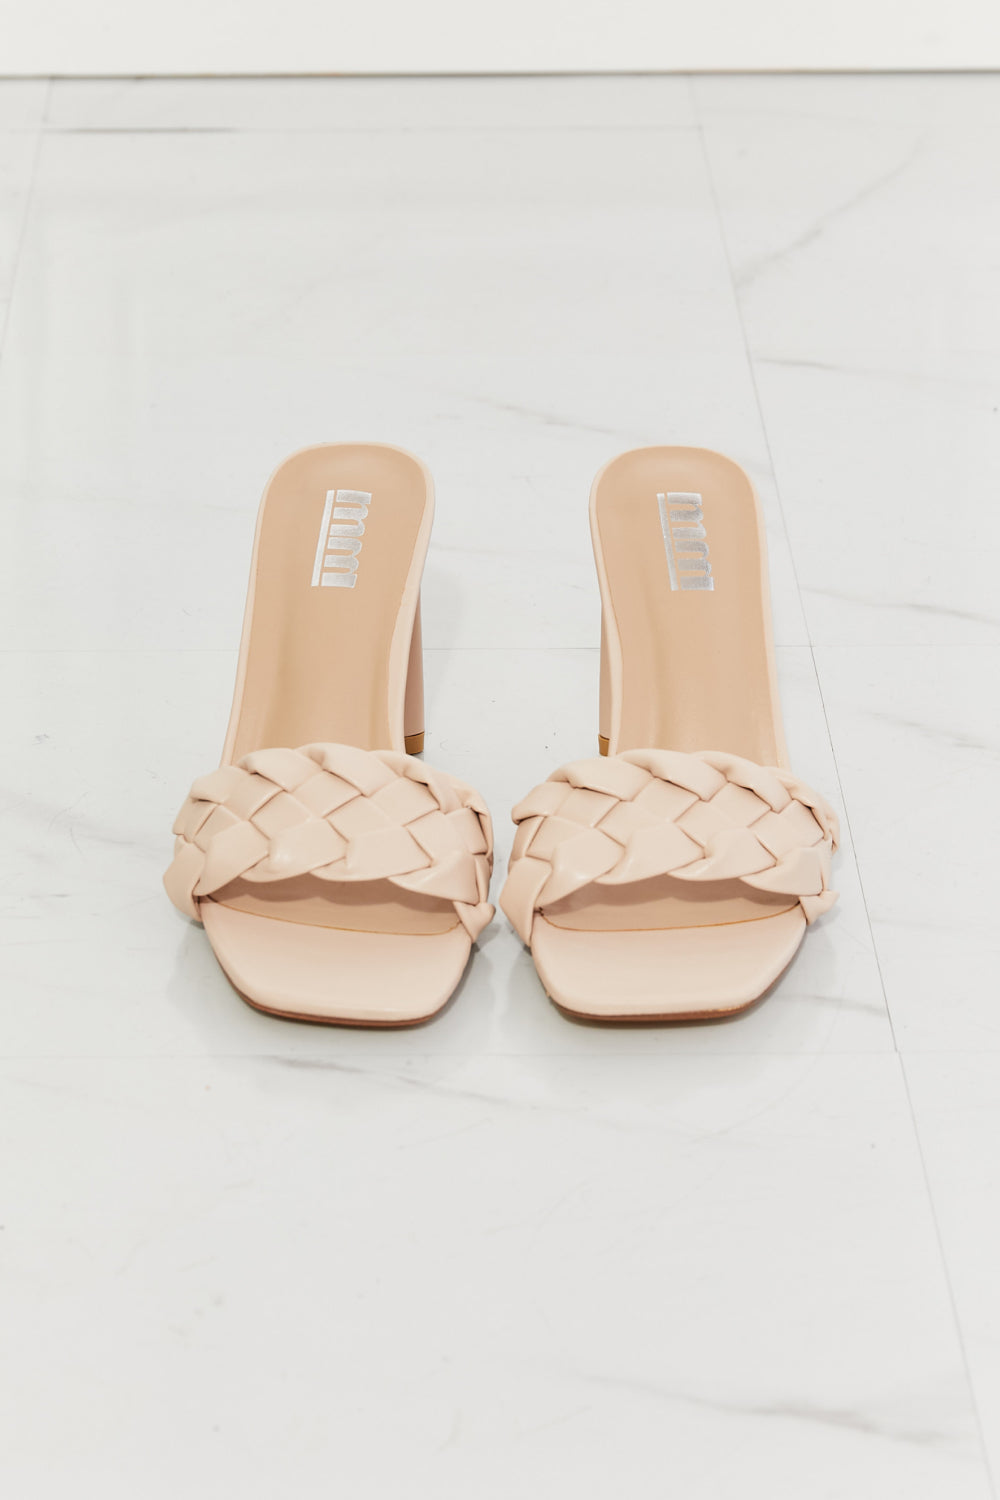 MMShoes Top of the World Braided Block Heel Sandals in Beige - BEAUTY COSMOTICS SHOP